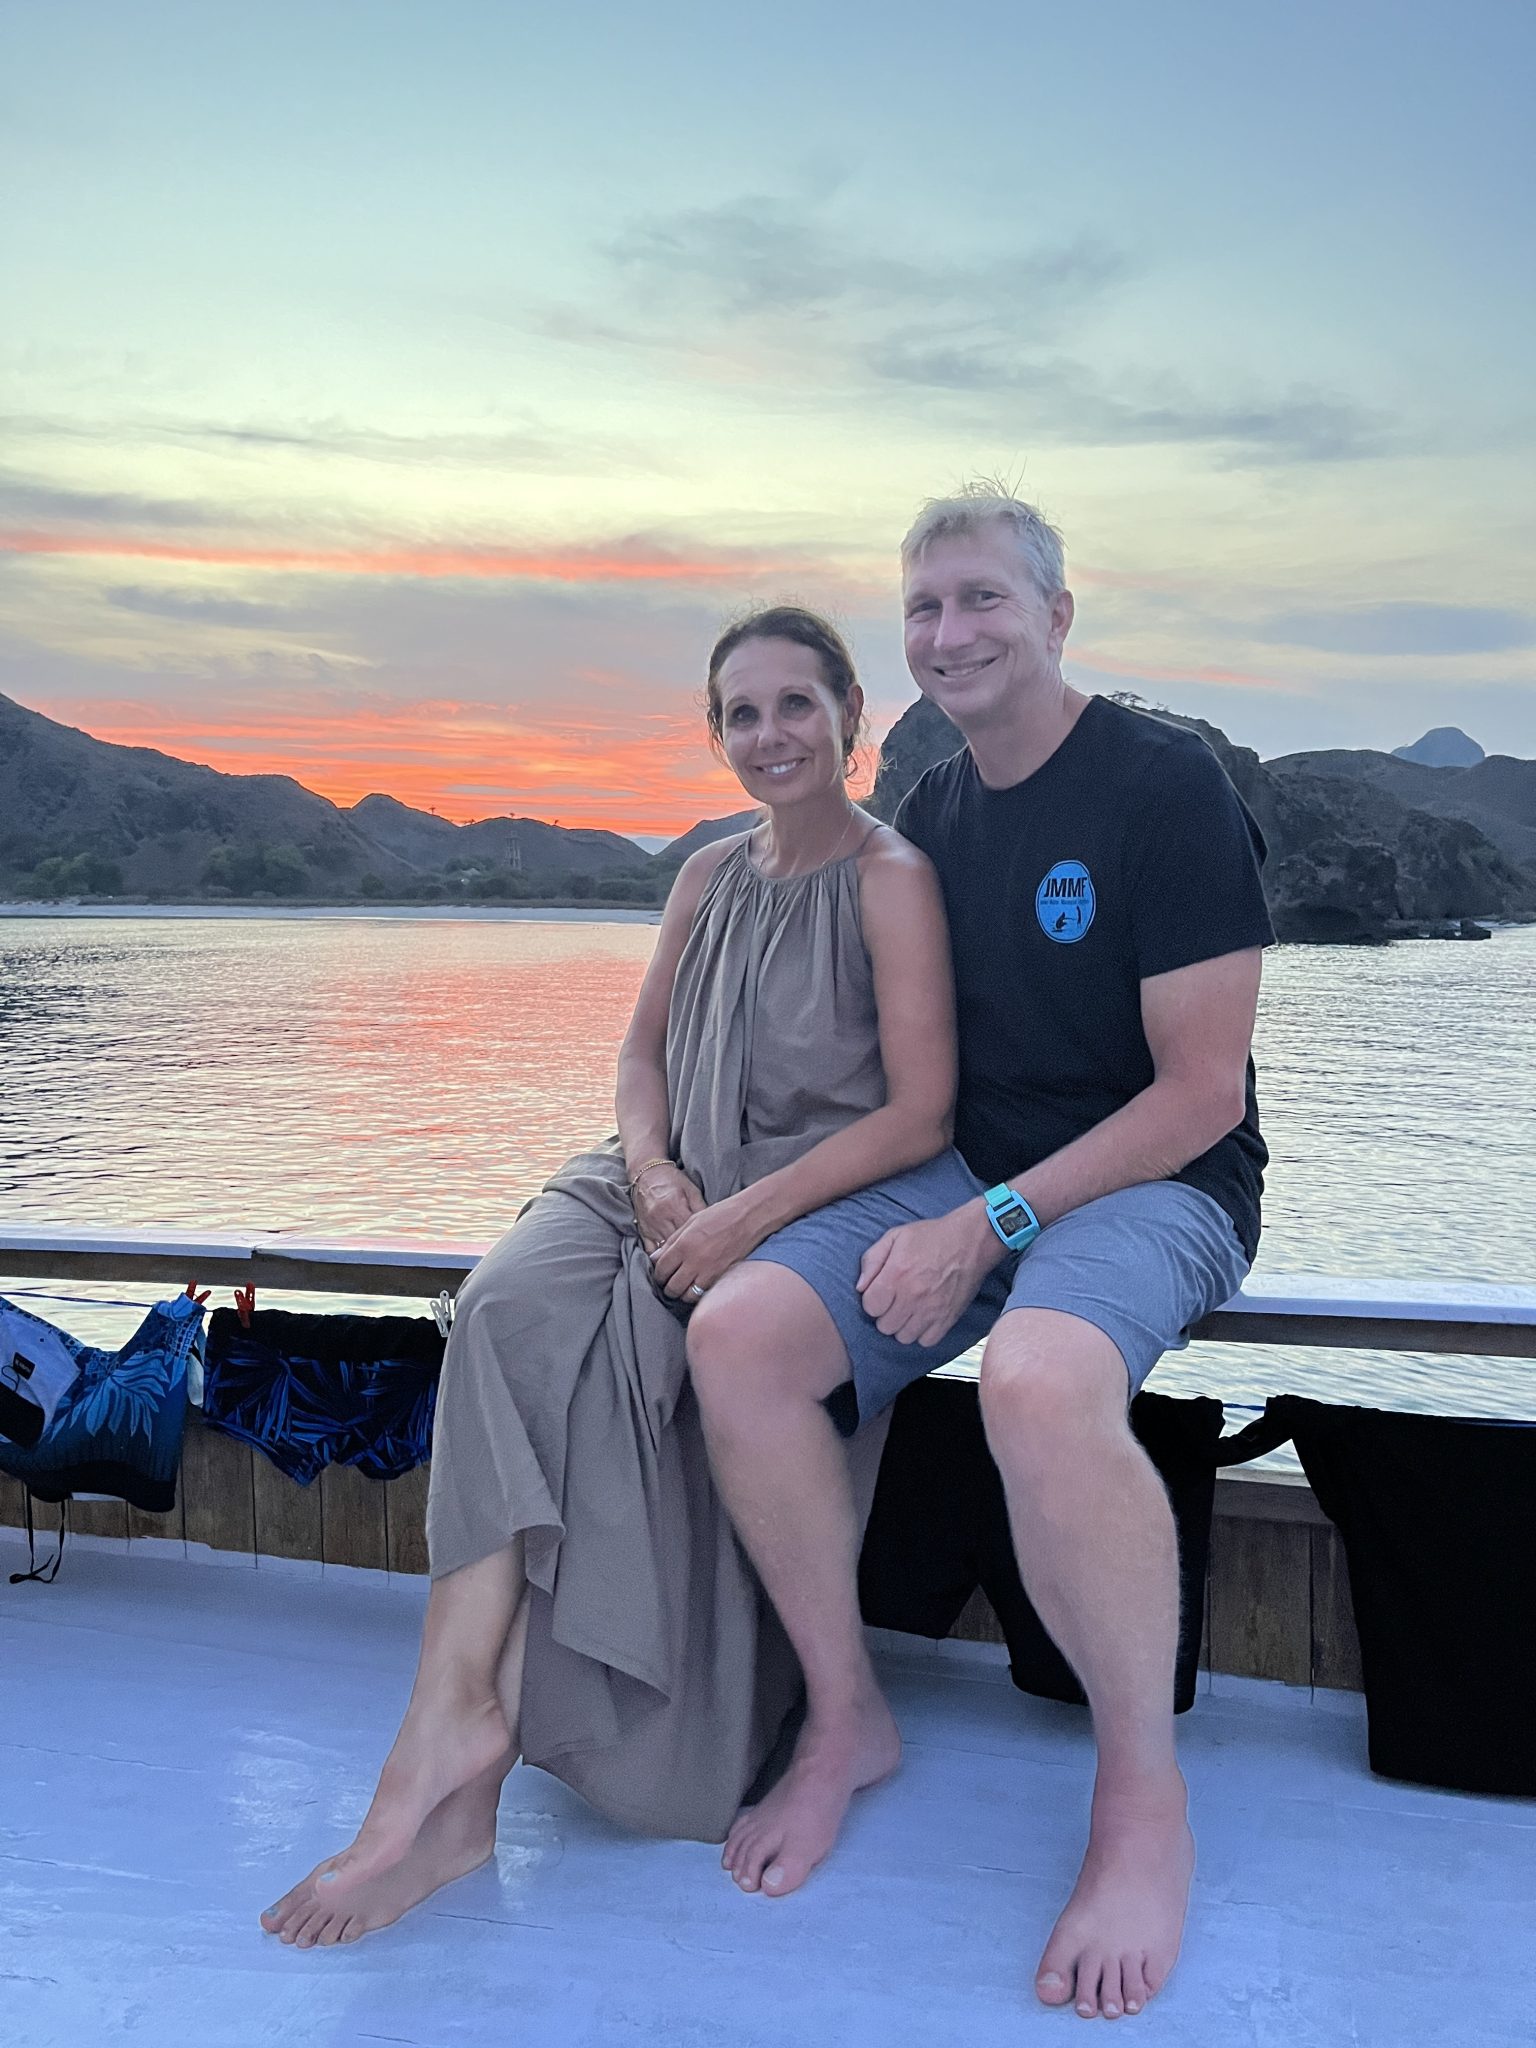 Sunsets in the komodo national park are amazing